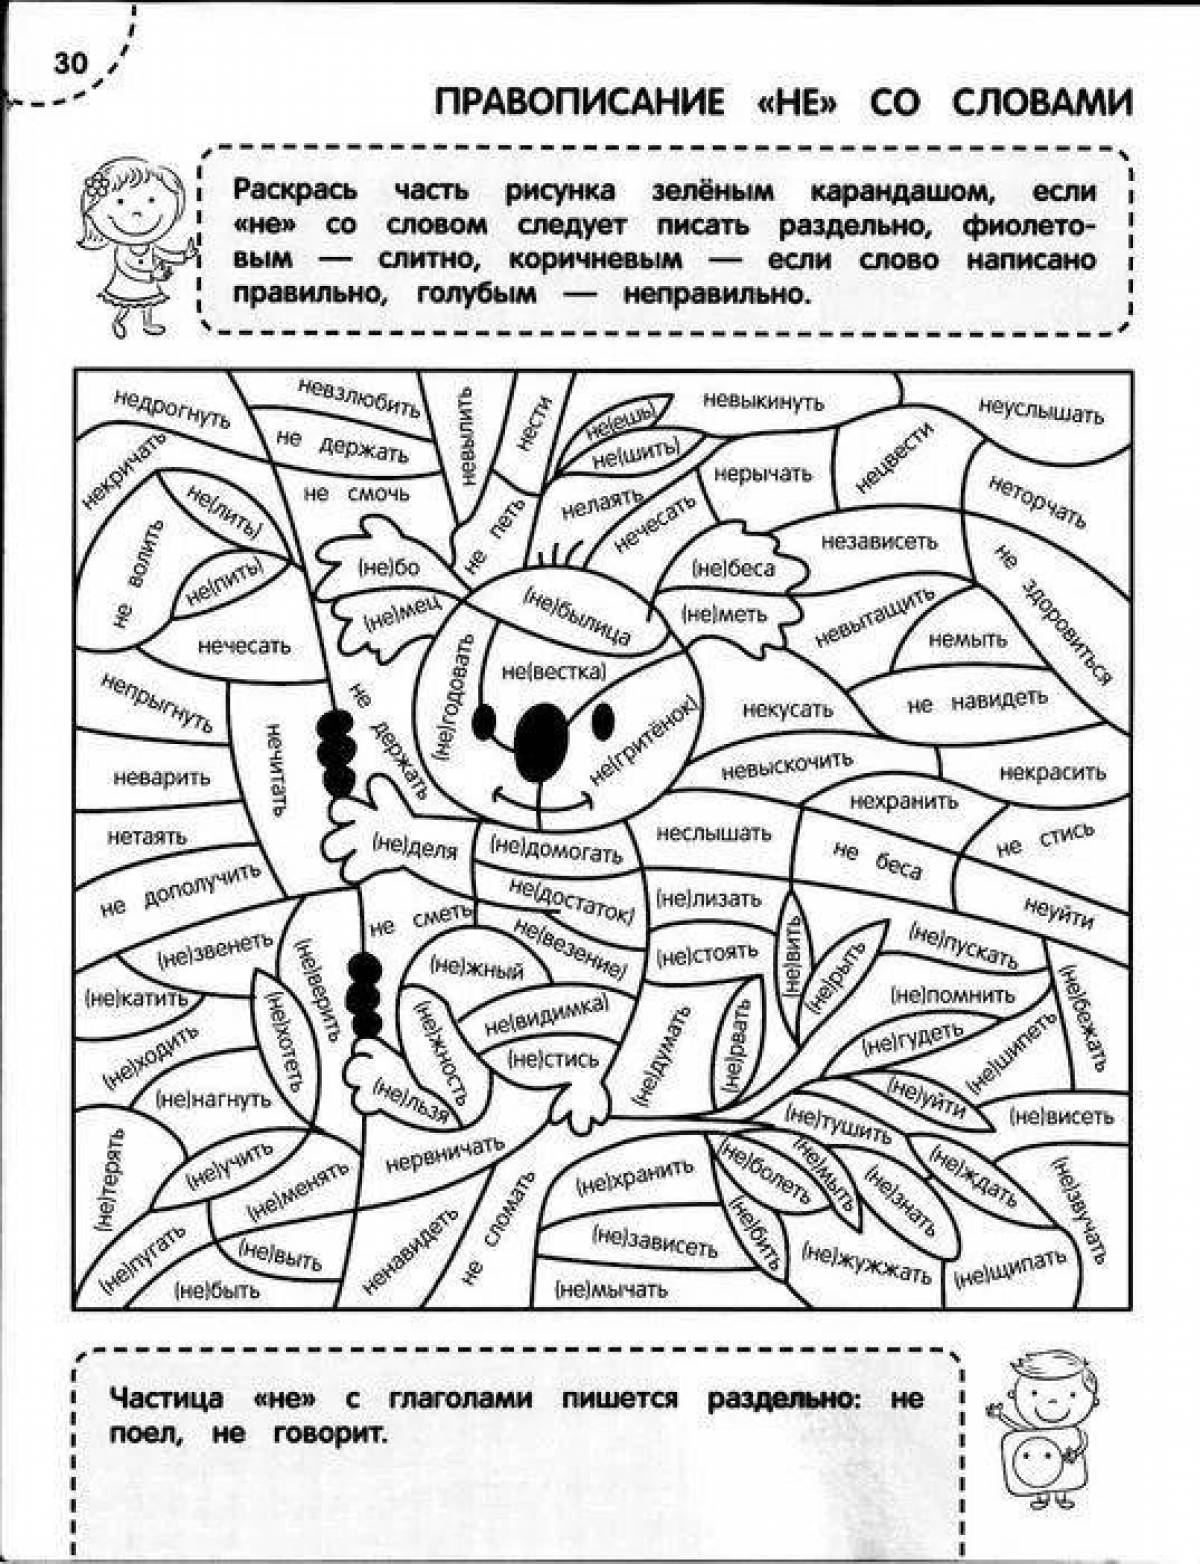 Commemorative coloring write without mistakes simulator grade 3